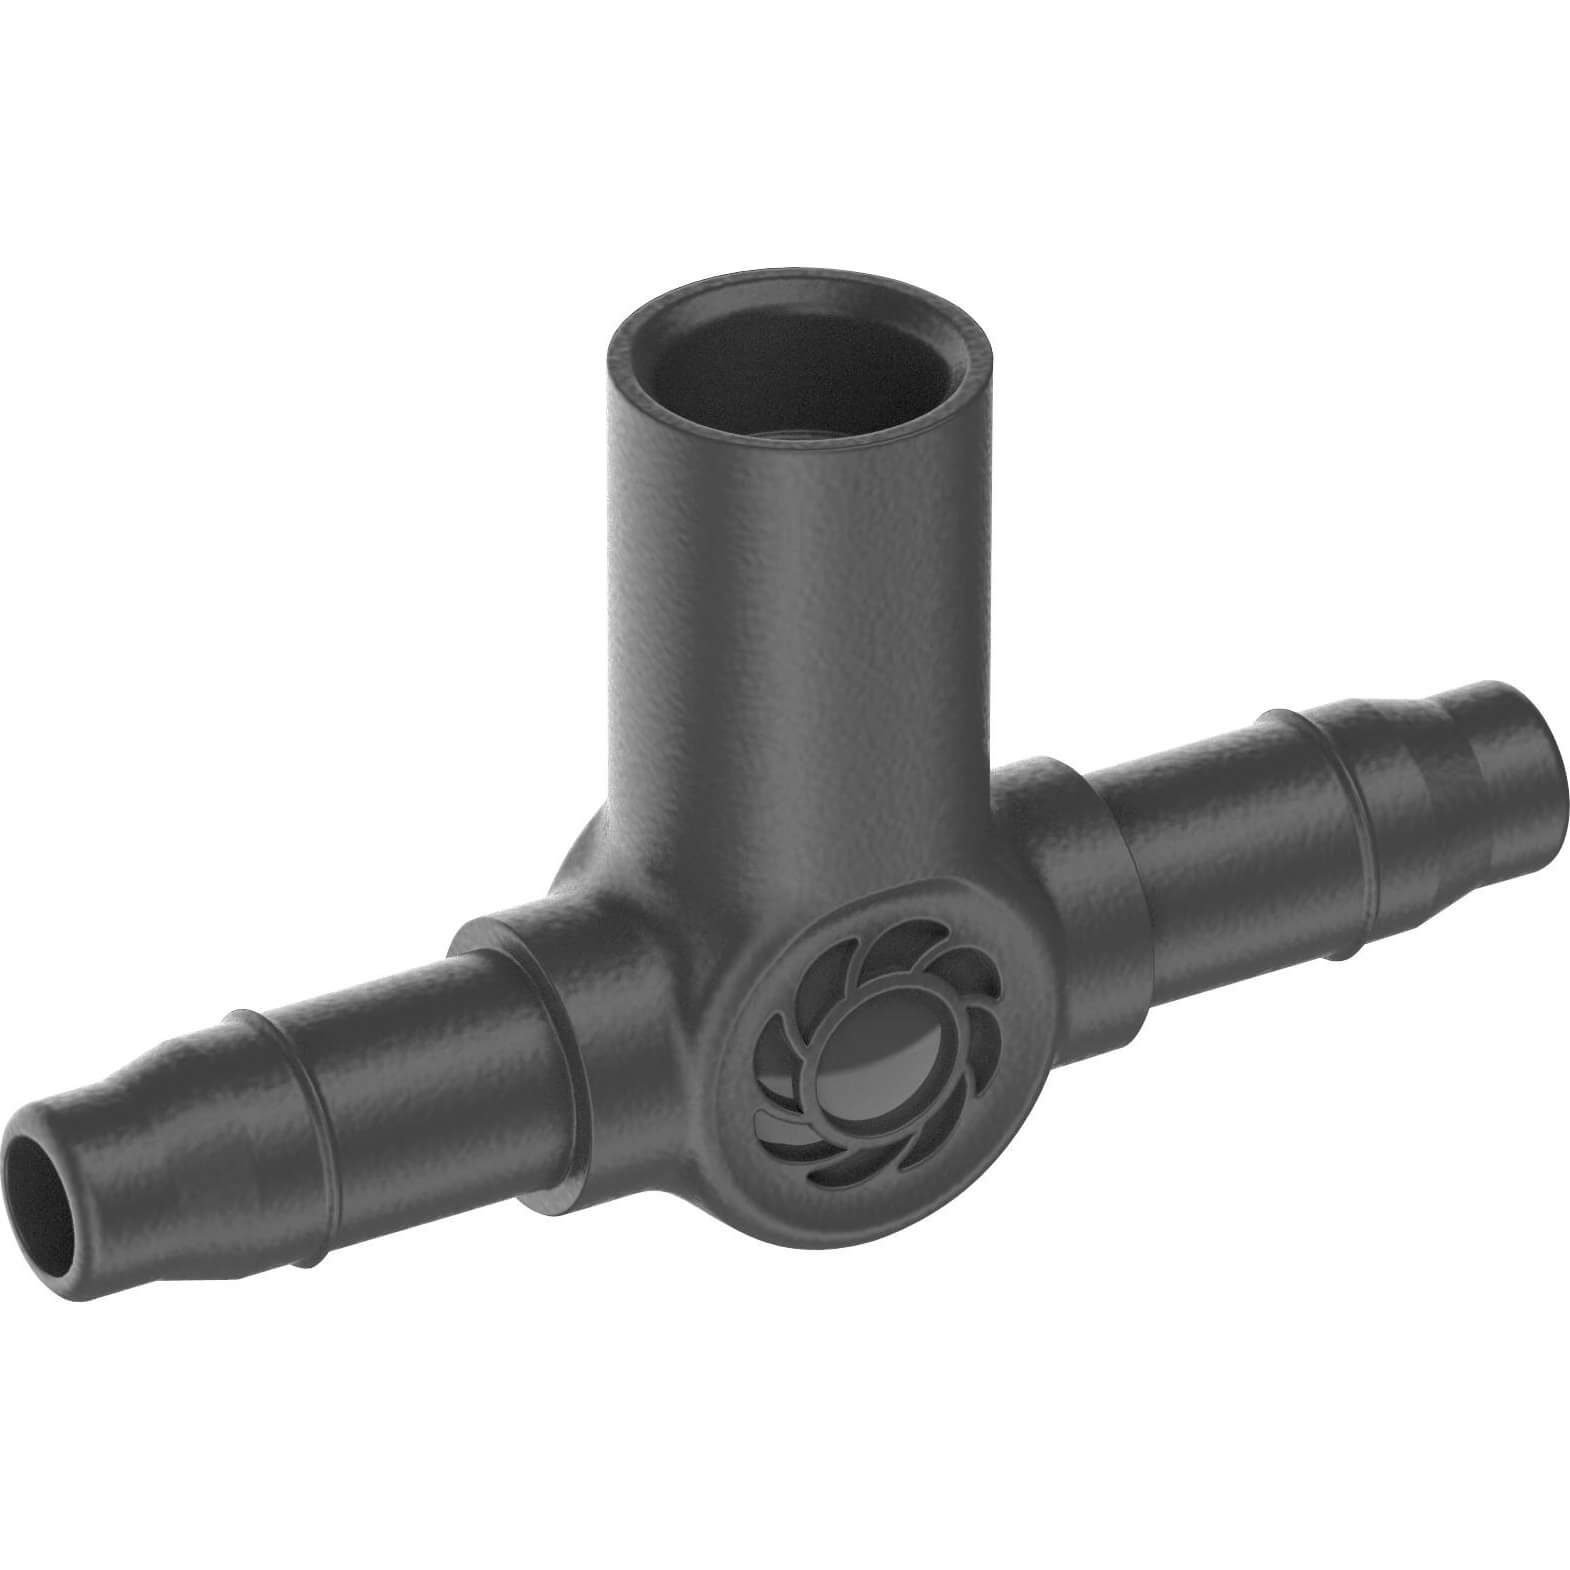 Gardena MICRO DRIP T Joint Connector for Spray Nozzles (New) 3/16" / 4.6mm Pack of 5